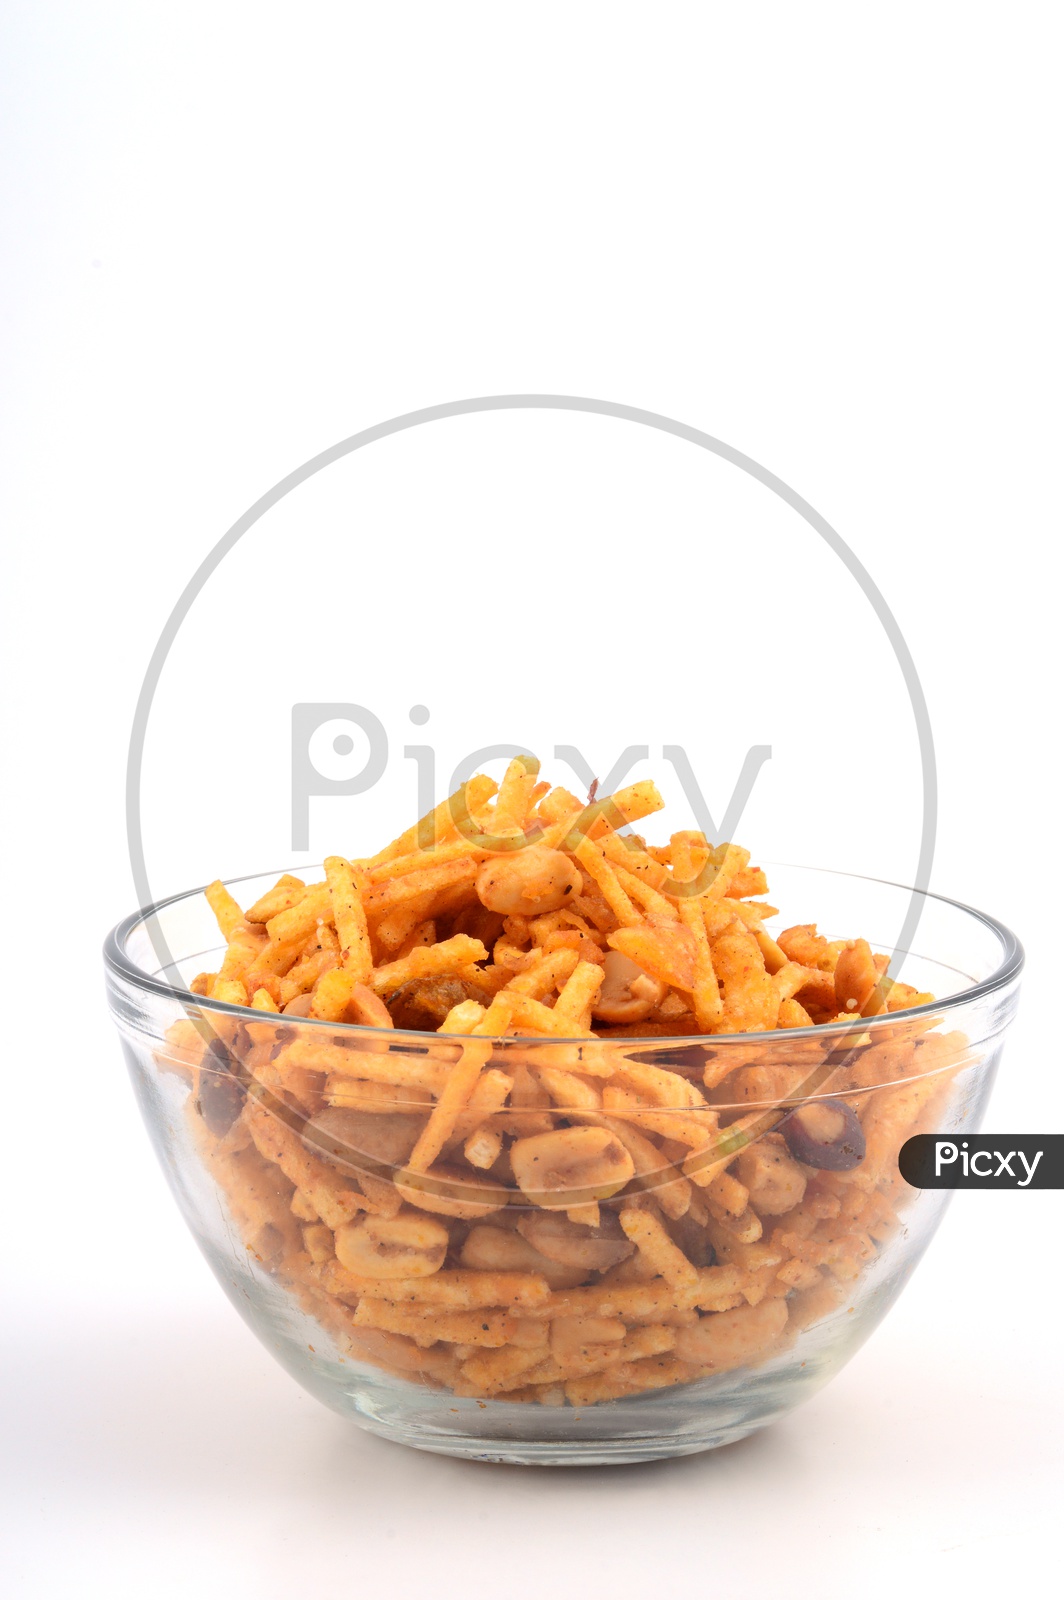 Deep fried salty dish - chivda or mixture made of gram flour and mixed with dry fruits.